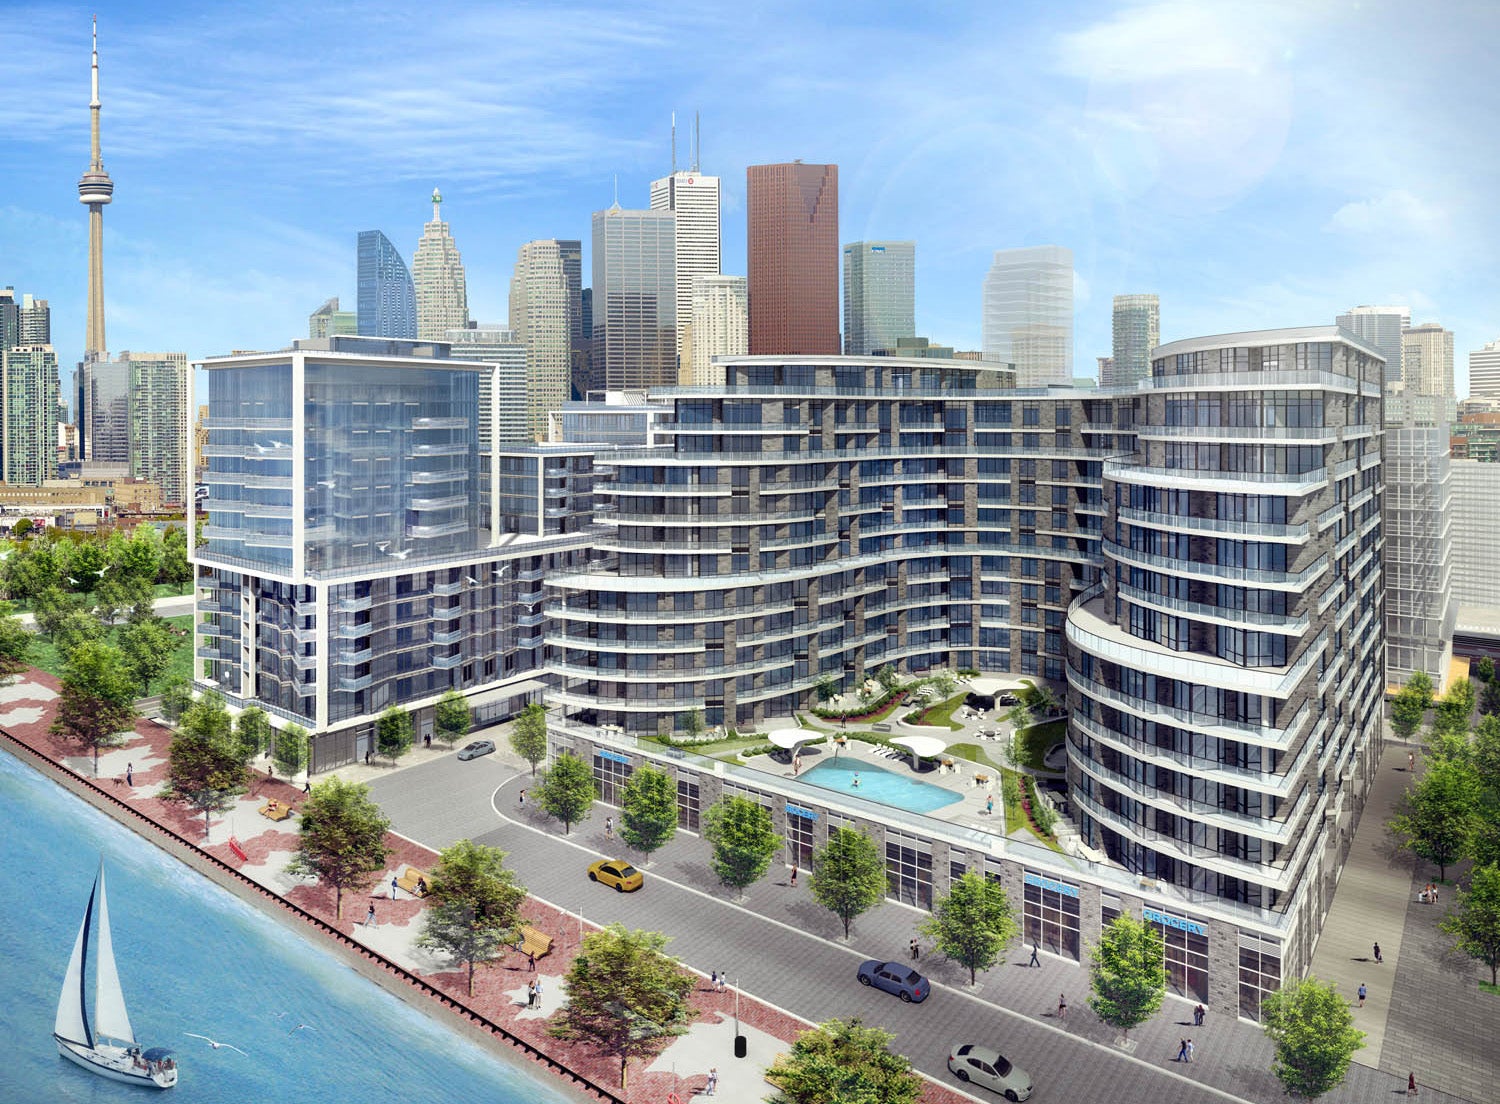 An artists' rendering of Aqualina and Aquavista residential buildings in the Bayside neighbourhood.